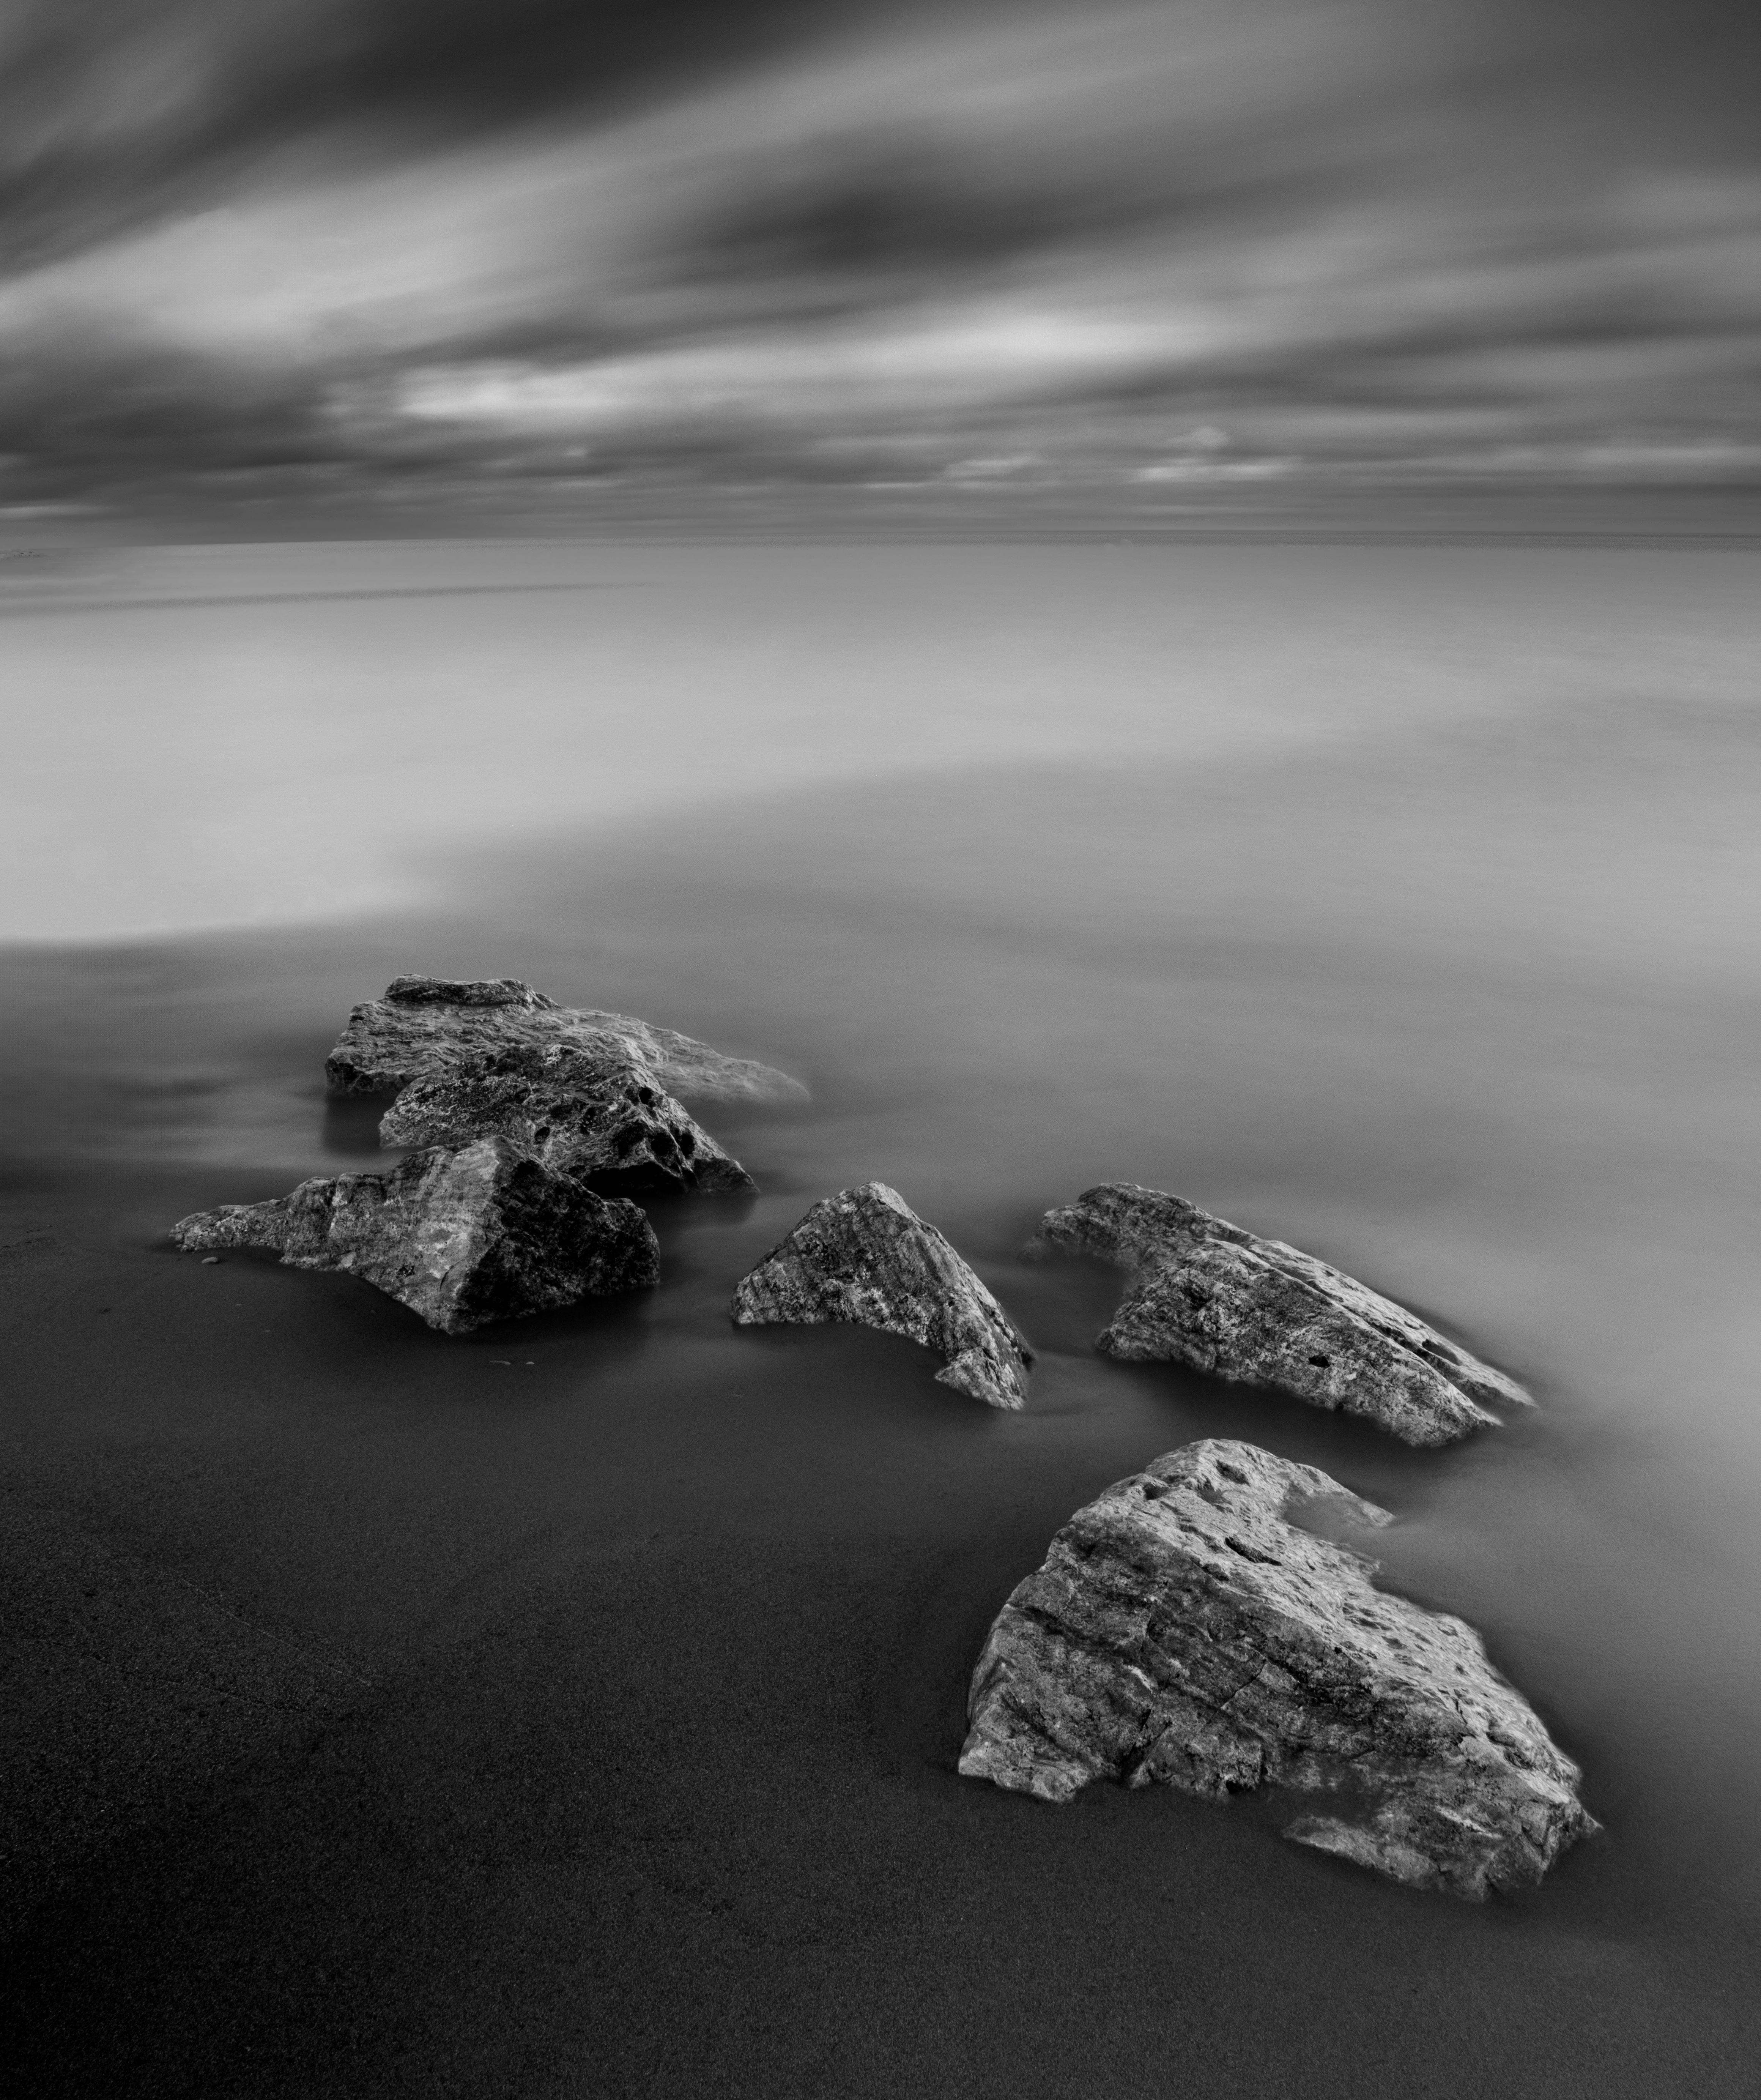 Rick Bogacz Black and White Photograph - "Rocks in Shallow Water", signed archival pigment print